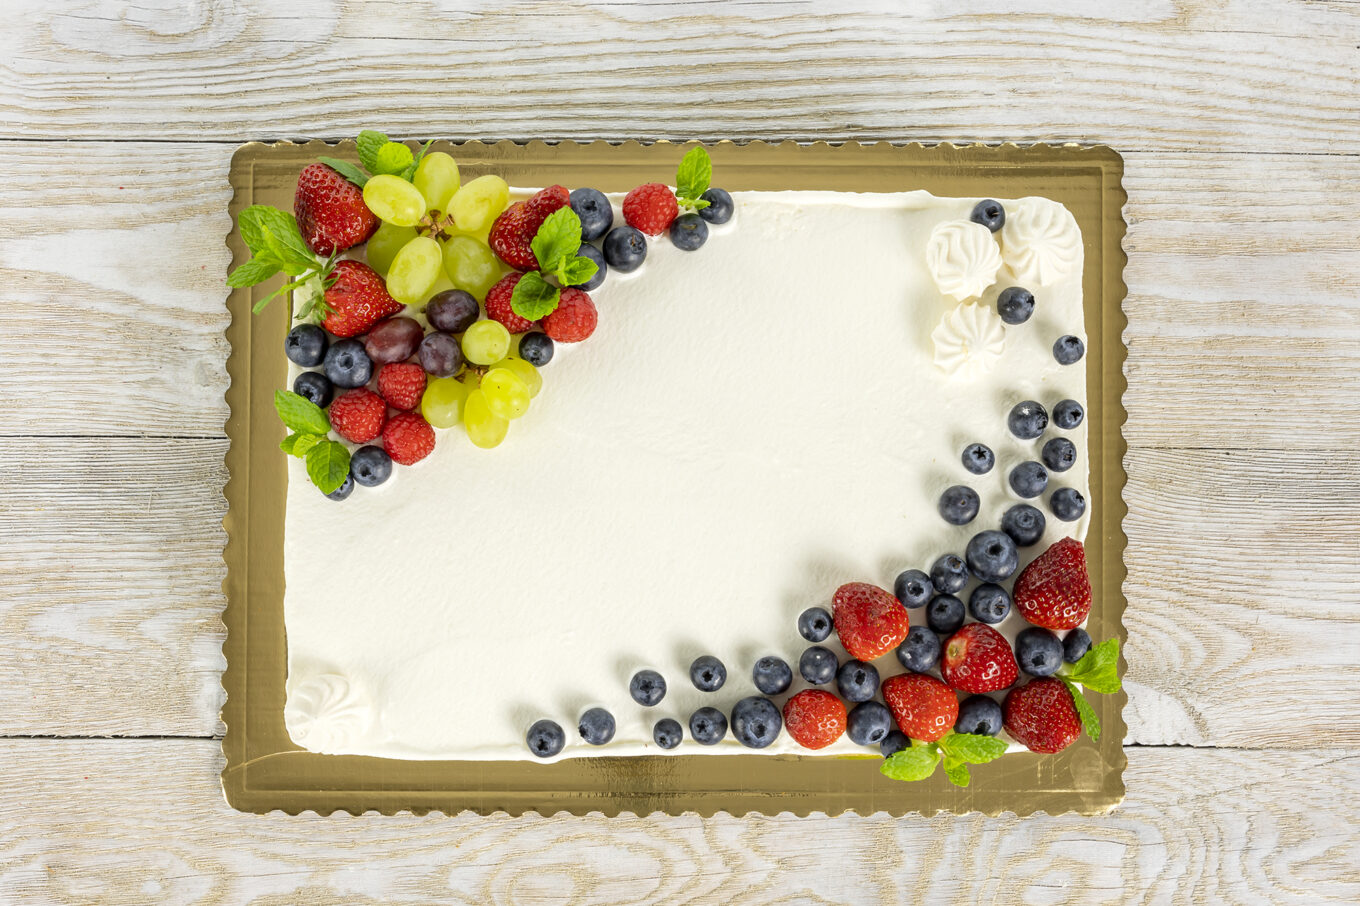 rectangular communion cake decorated with fruit Cukiernia Jacek Placek is synonymous with the taste of homemade cakes made of natural products.